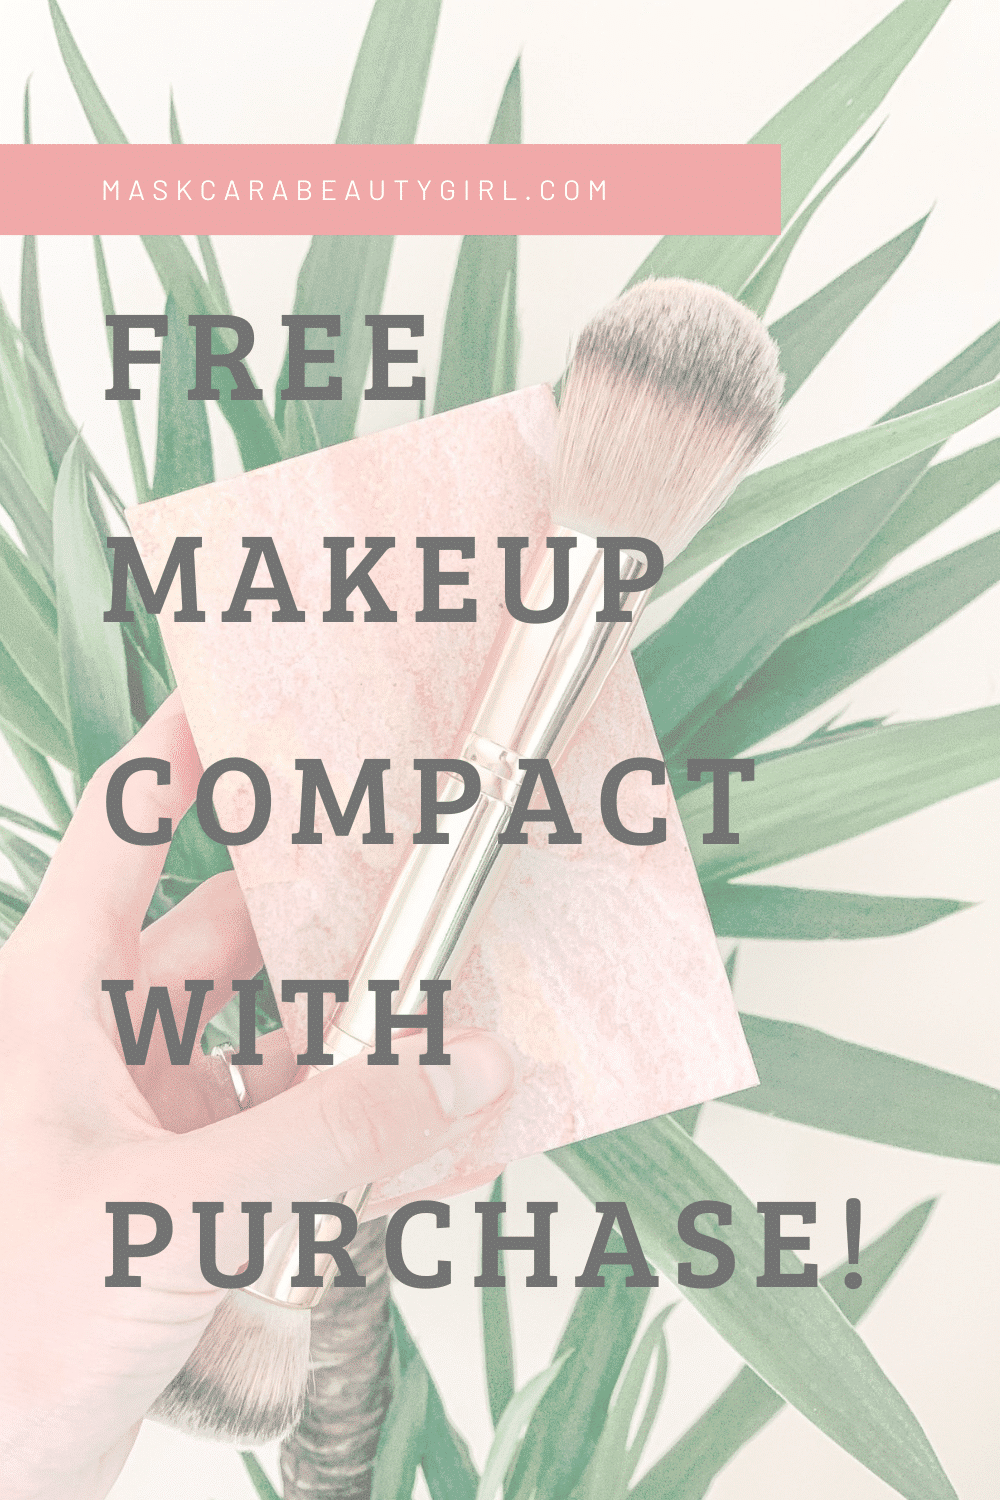 How to Get Maskcara Free Compacts